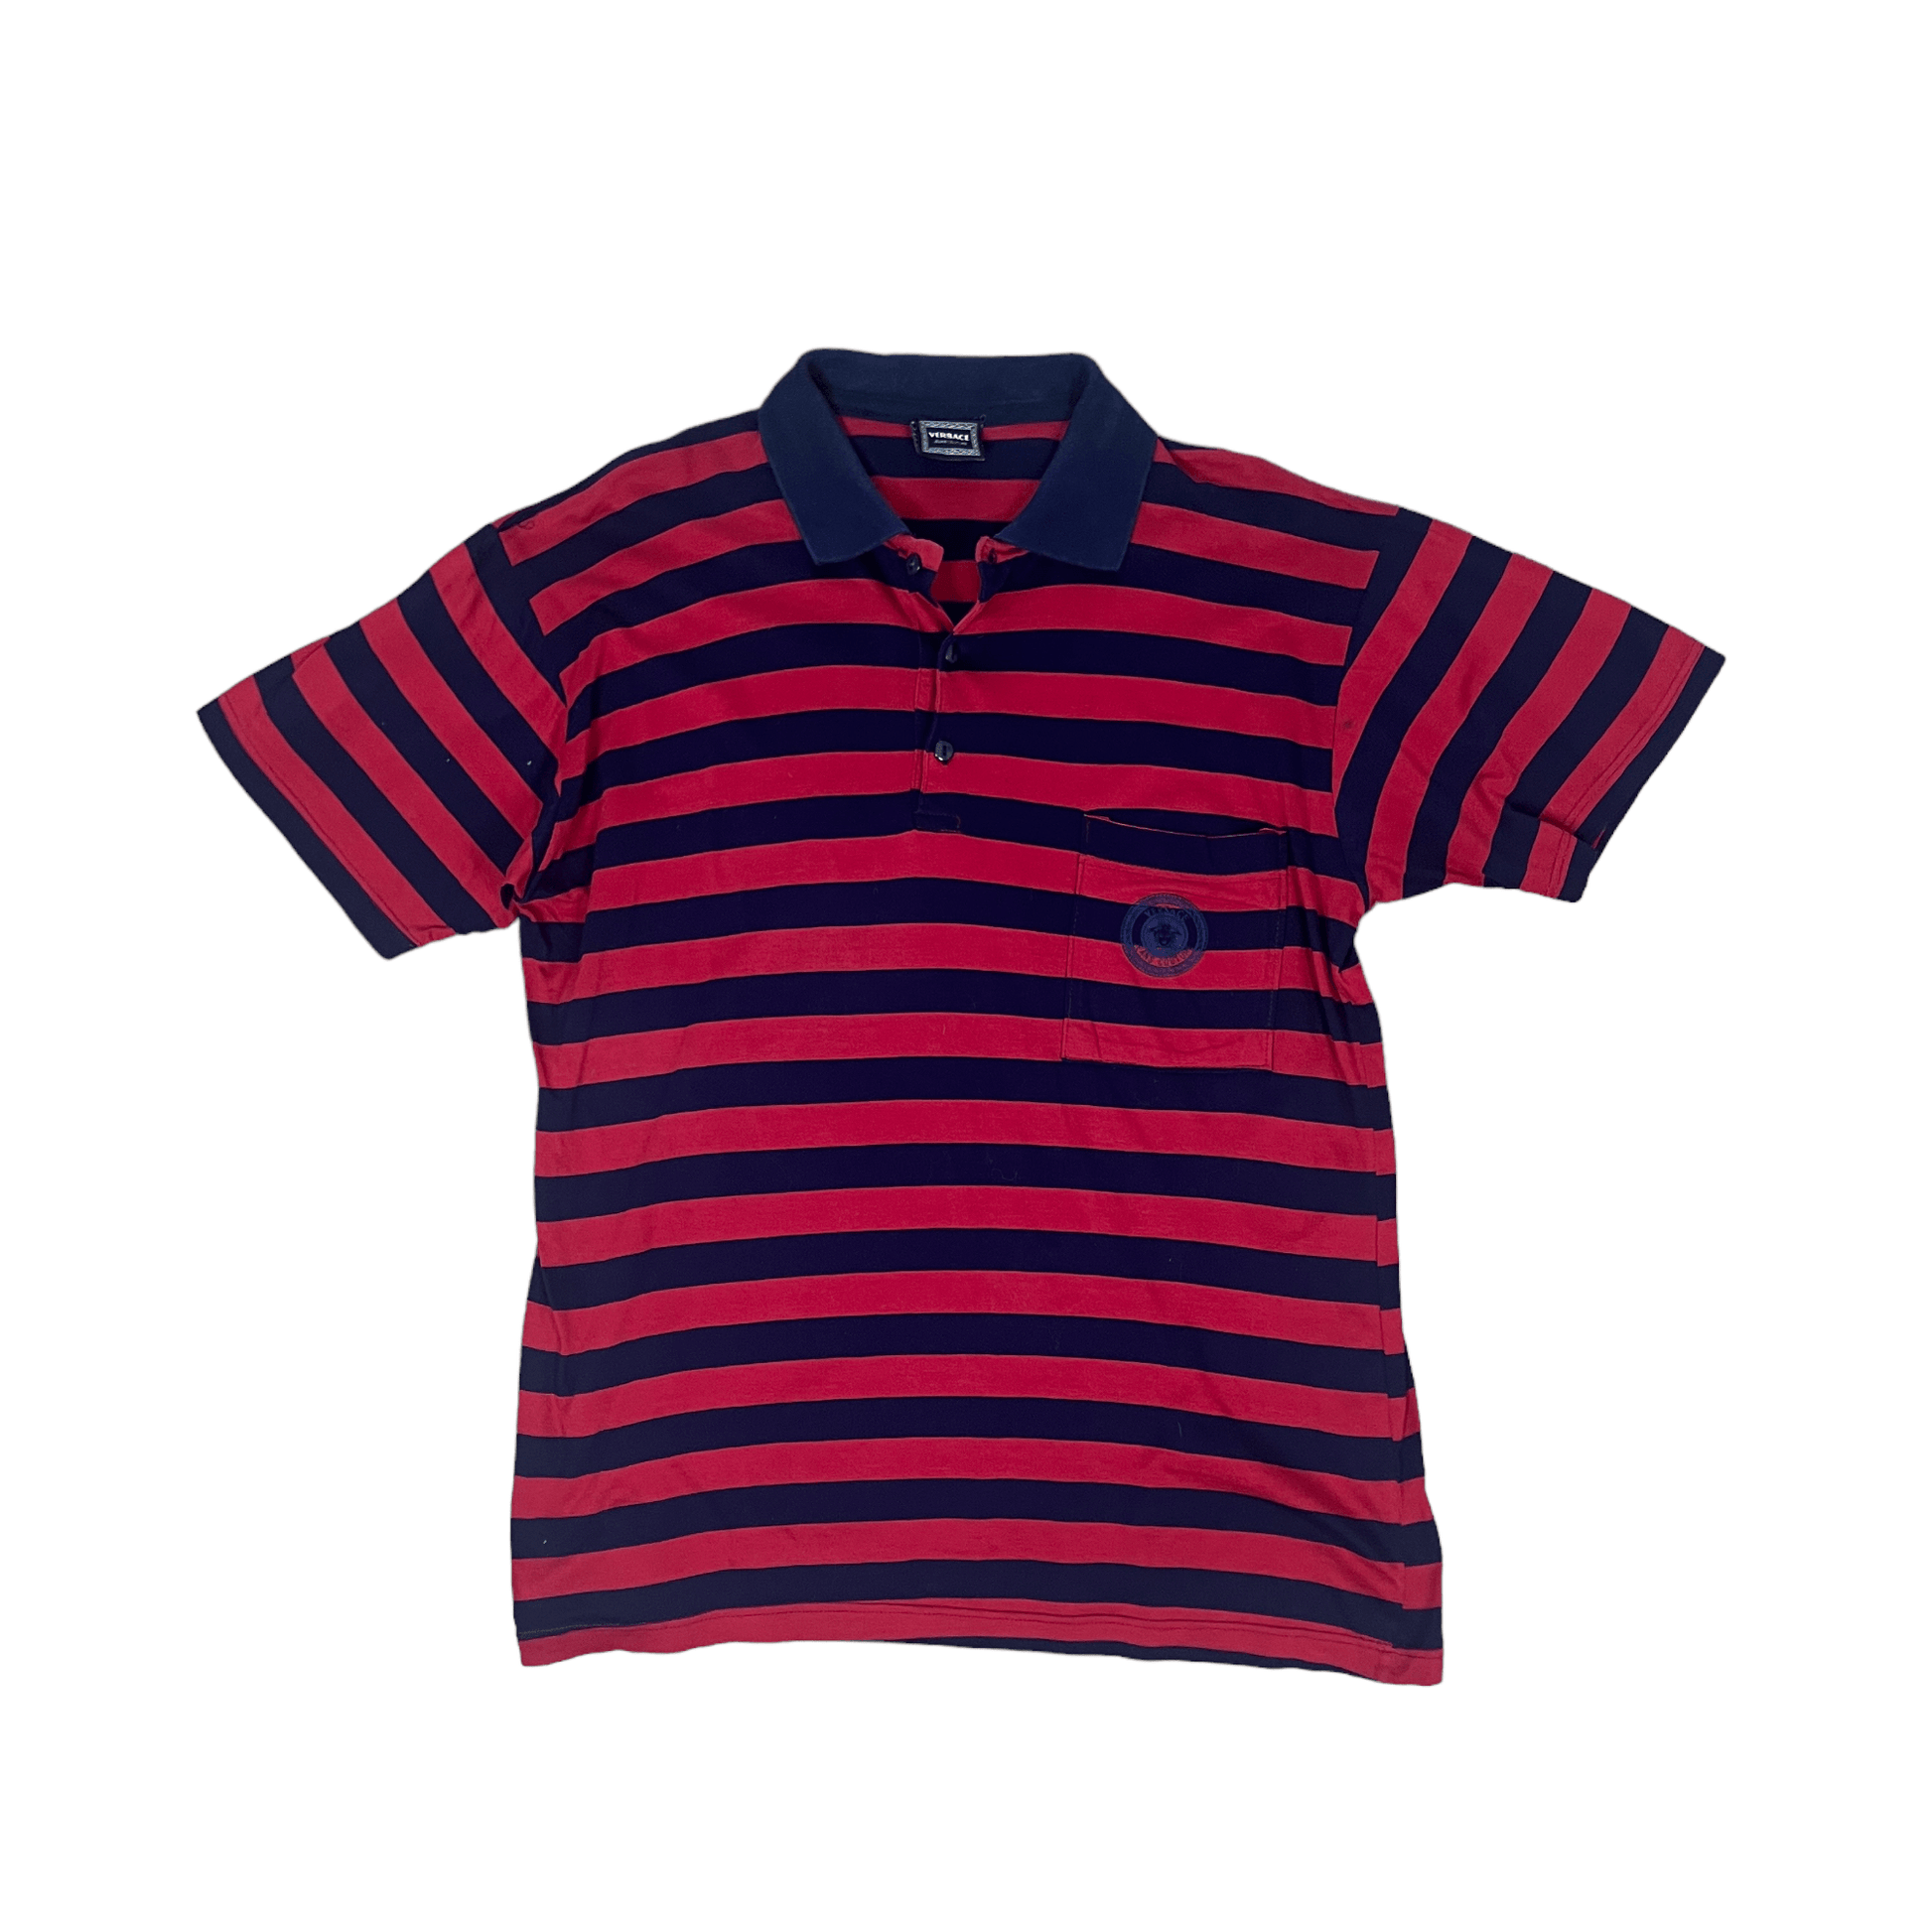 Vintage 90s Navy Blue + Red Versace Striped Polo Shirt - Large - The Streetwear Studio